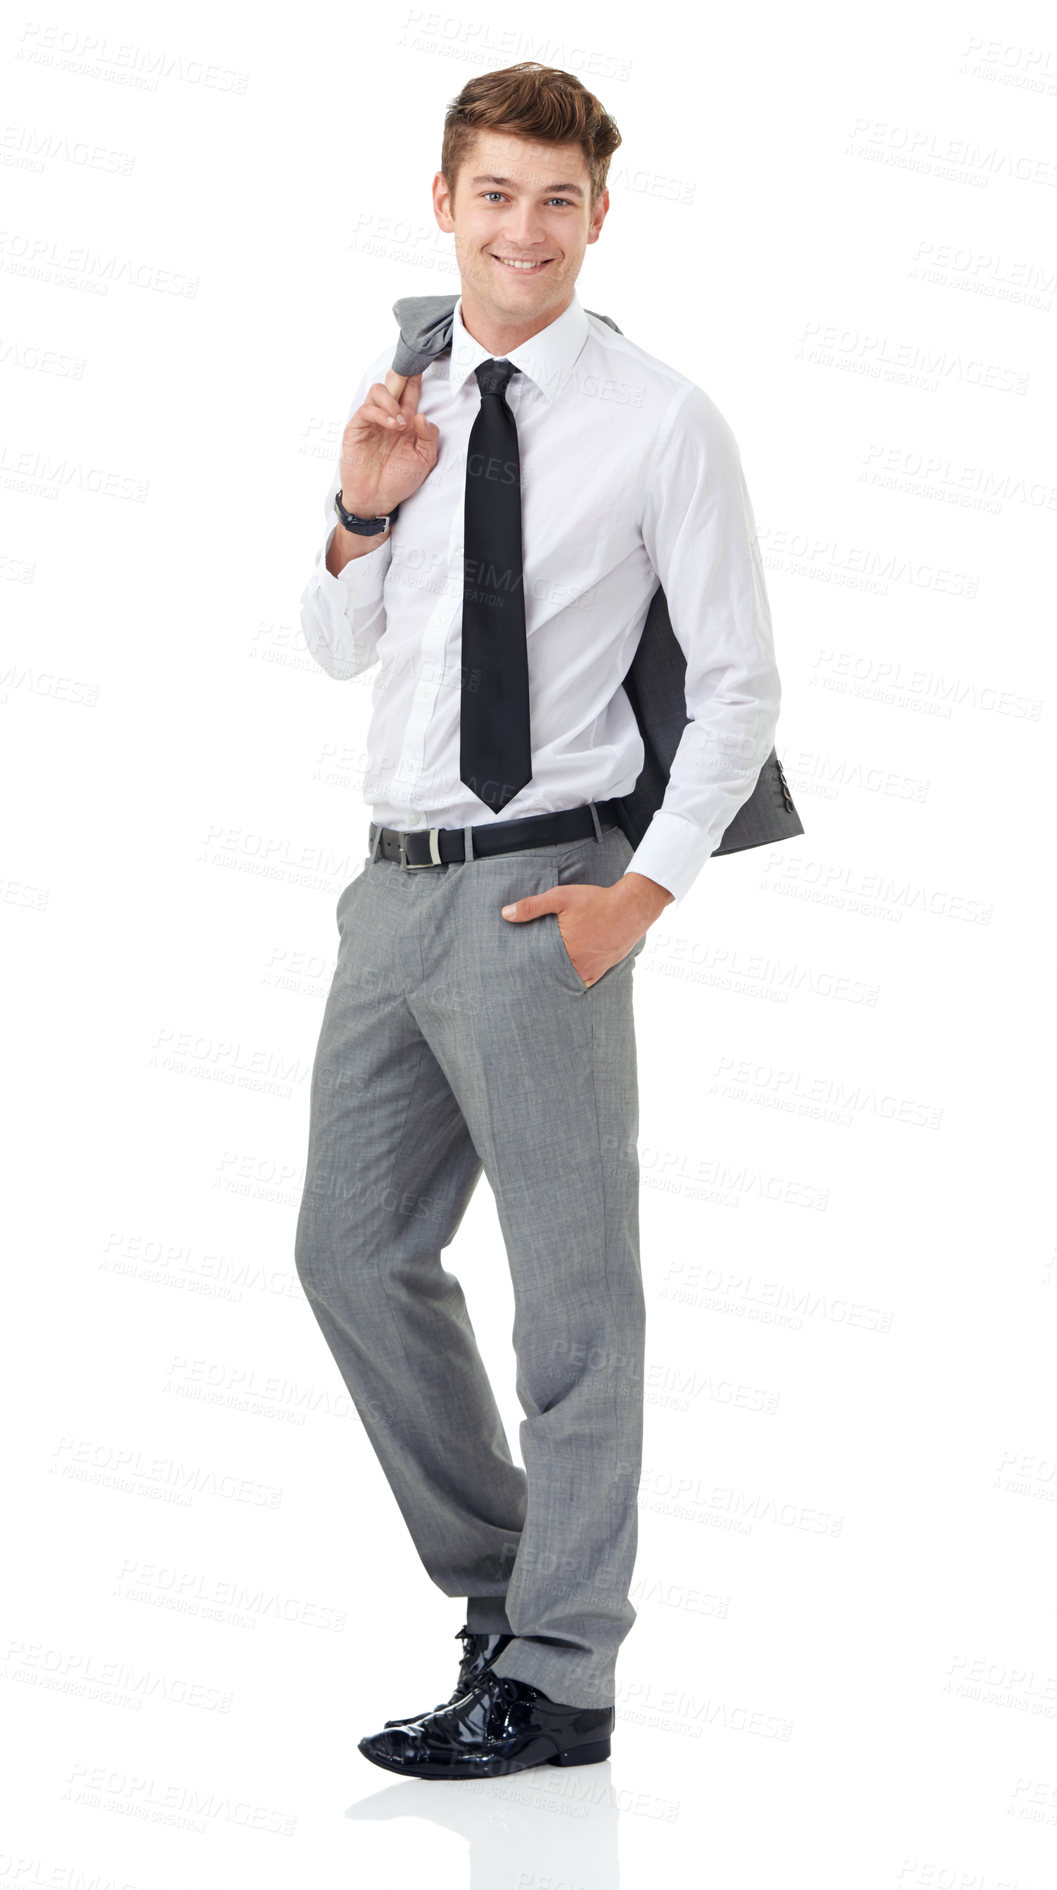 Buy stock photo Studio, portrait or young businessman with smile in fashion suit or professional attorney by white background. Lawyer, positive and face with pride for law career and corporate style jacket in mockup